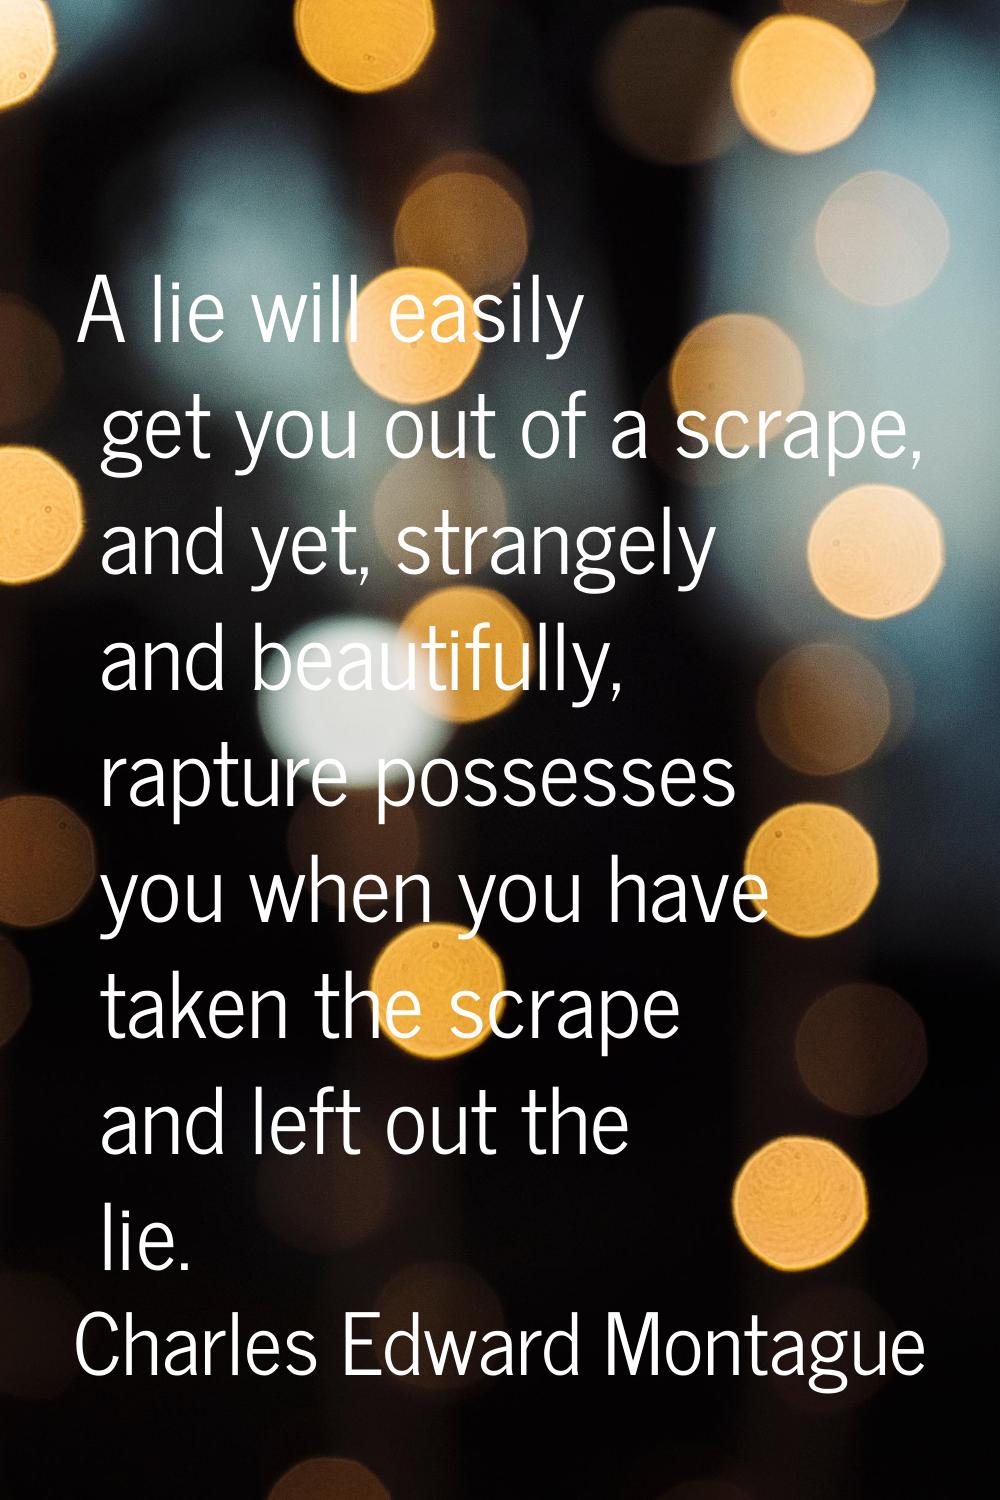 A lie will easily get you out of a scrape, and yet, strangely and beautifully, rapture possesses yo